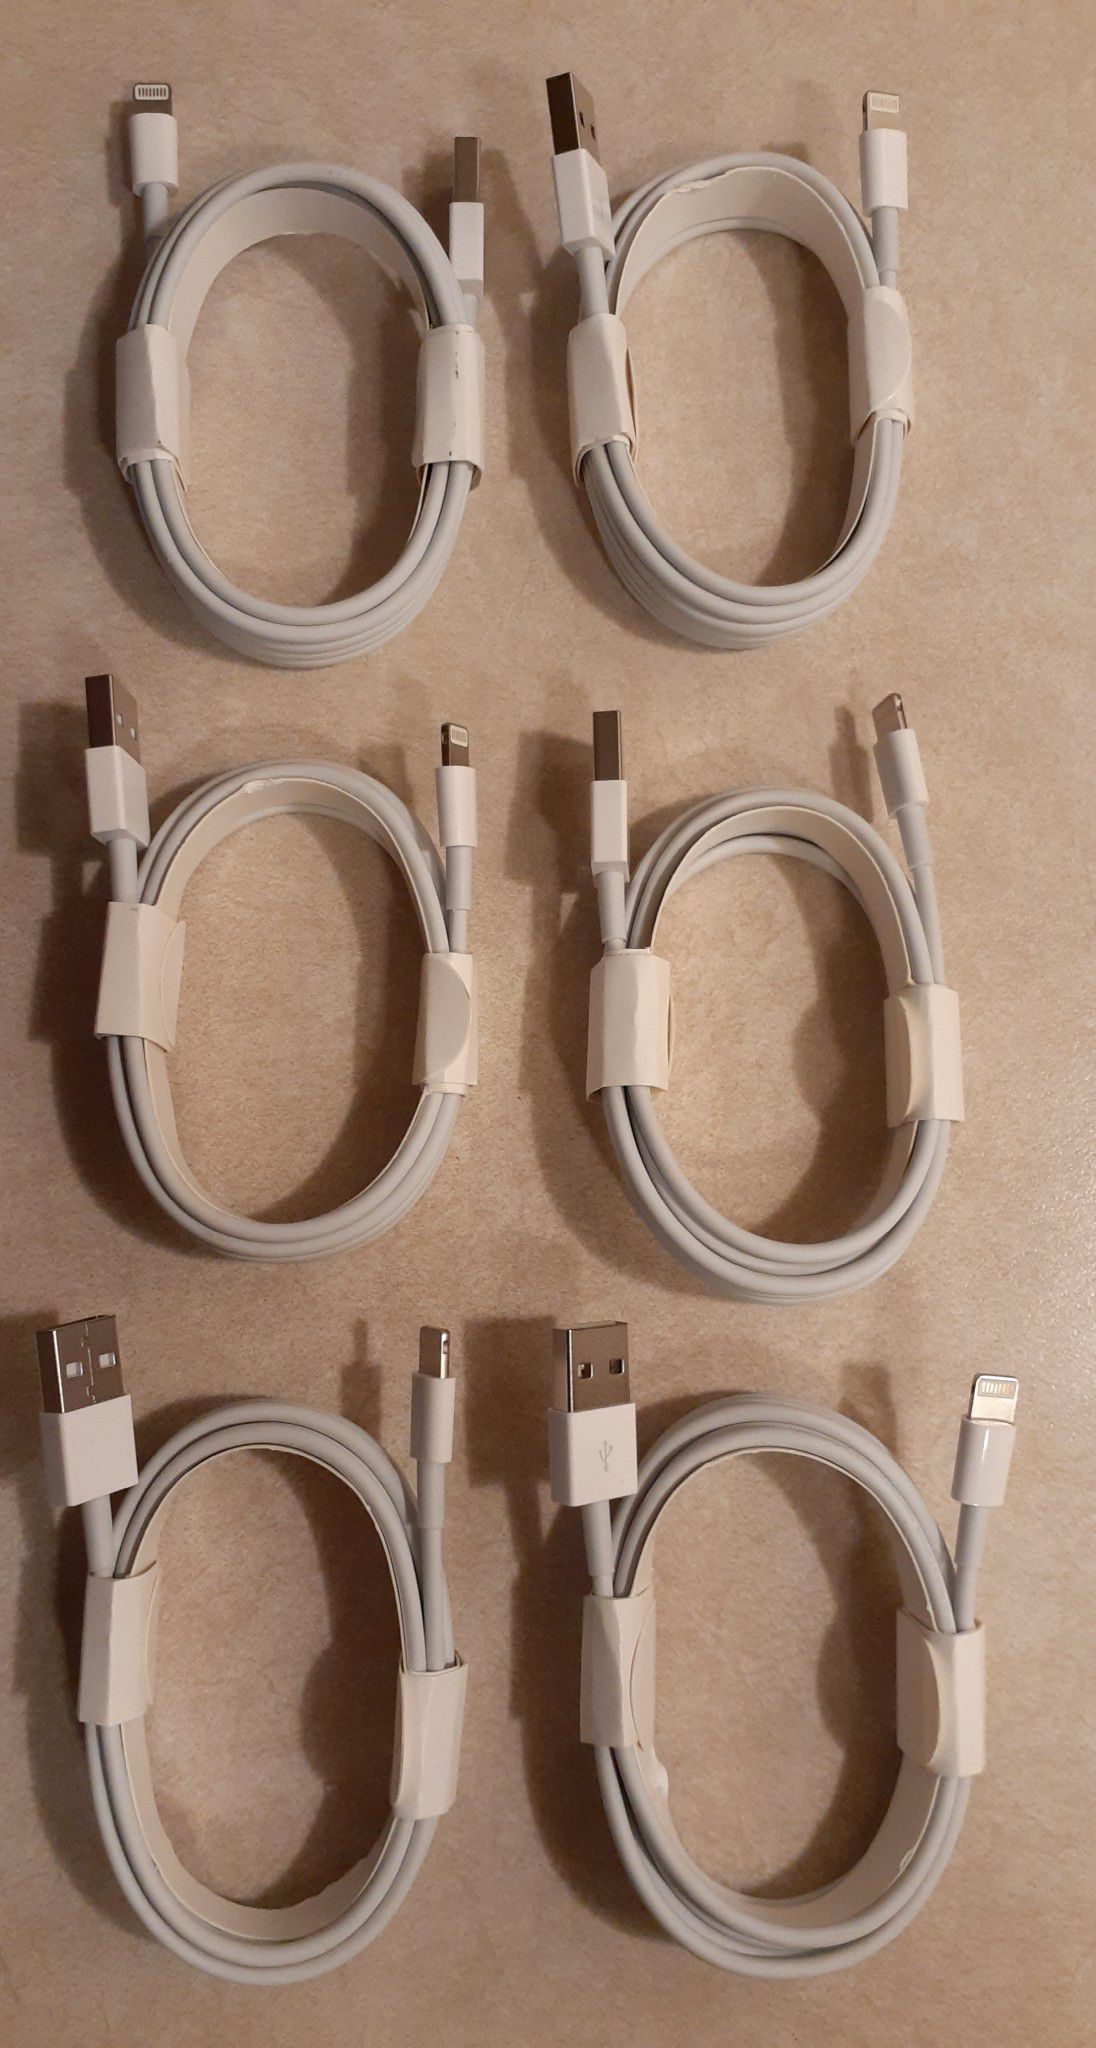 6 For $30 6FT iPhone Charging Cables Bundle